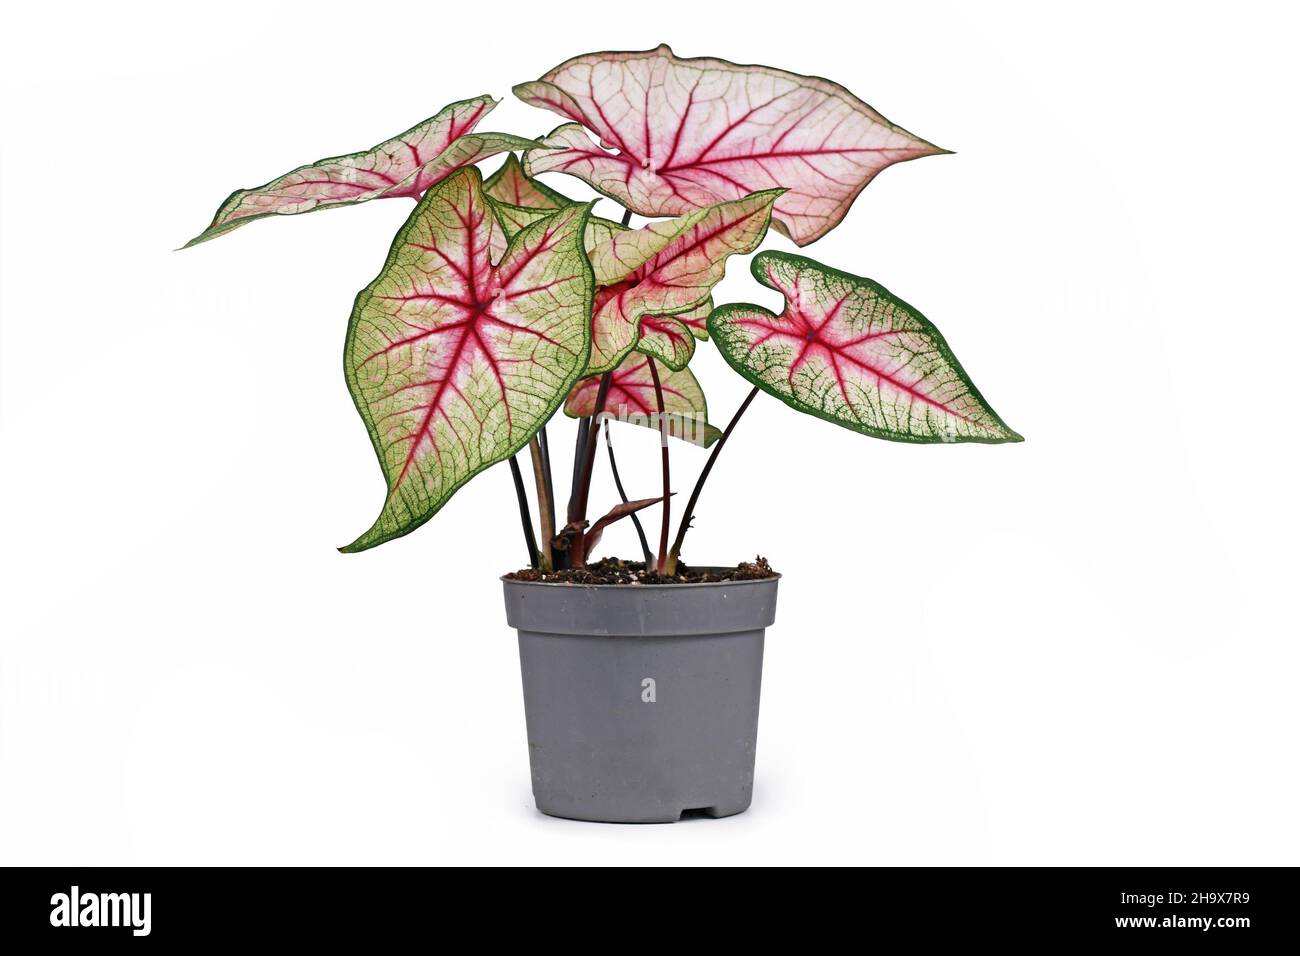 Tropical 'Caladium White Queen' plant with white leaves and pink veins in pot isolated on white background Stock Photo